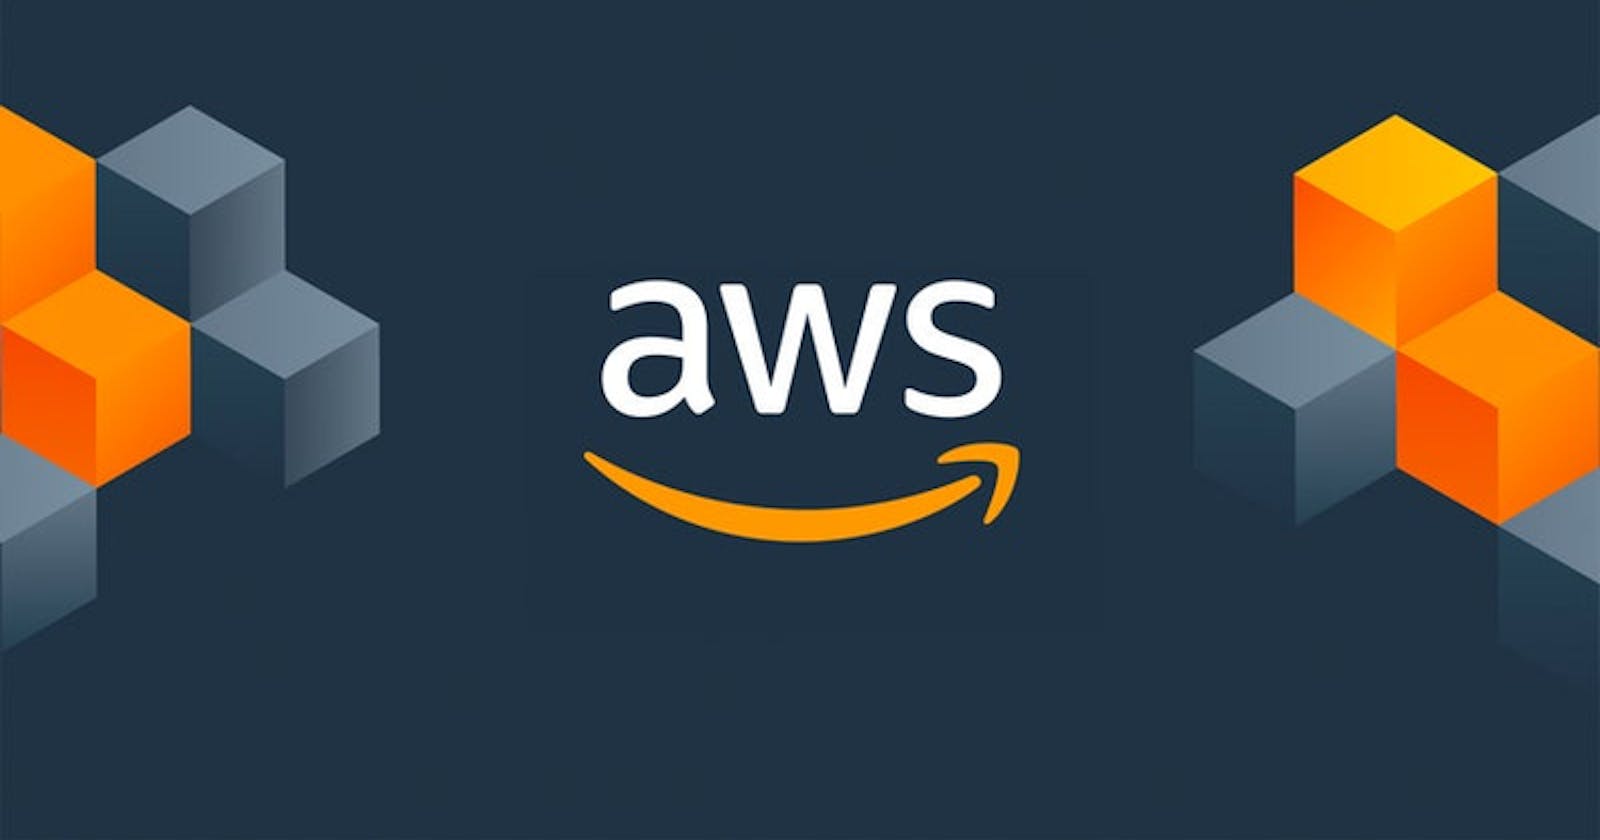 Getting started with AWS.